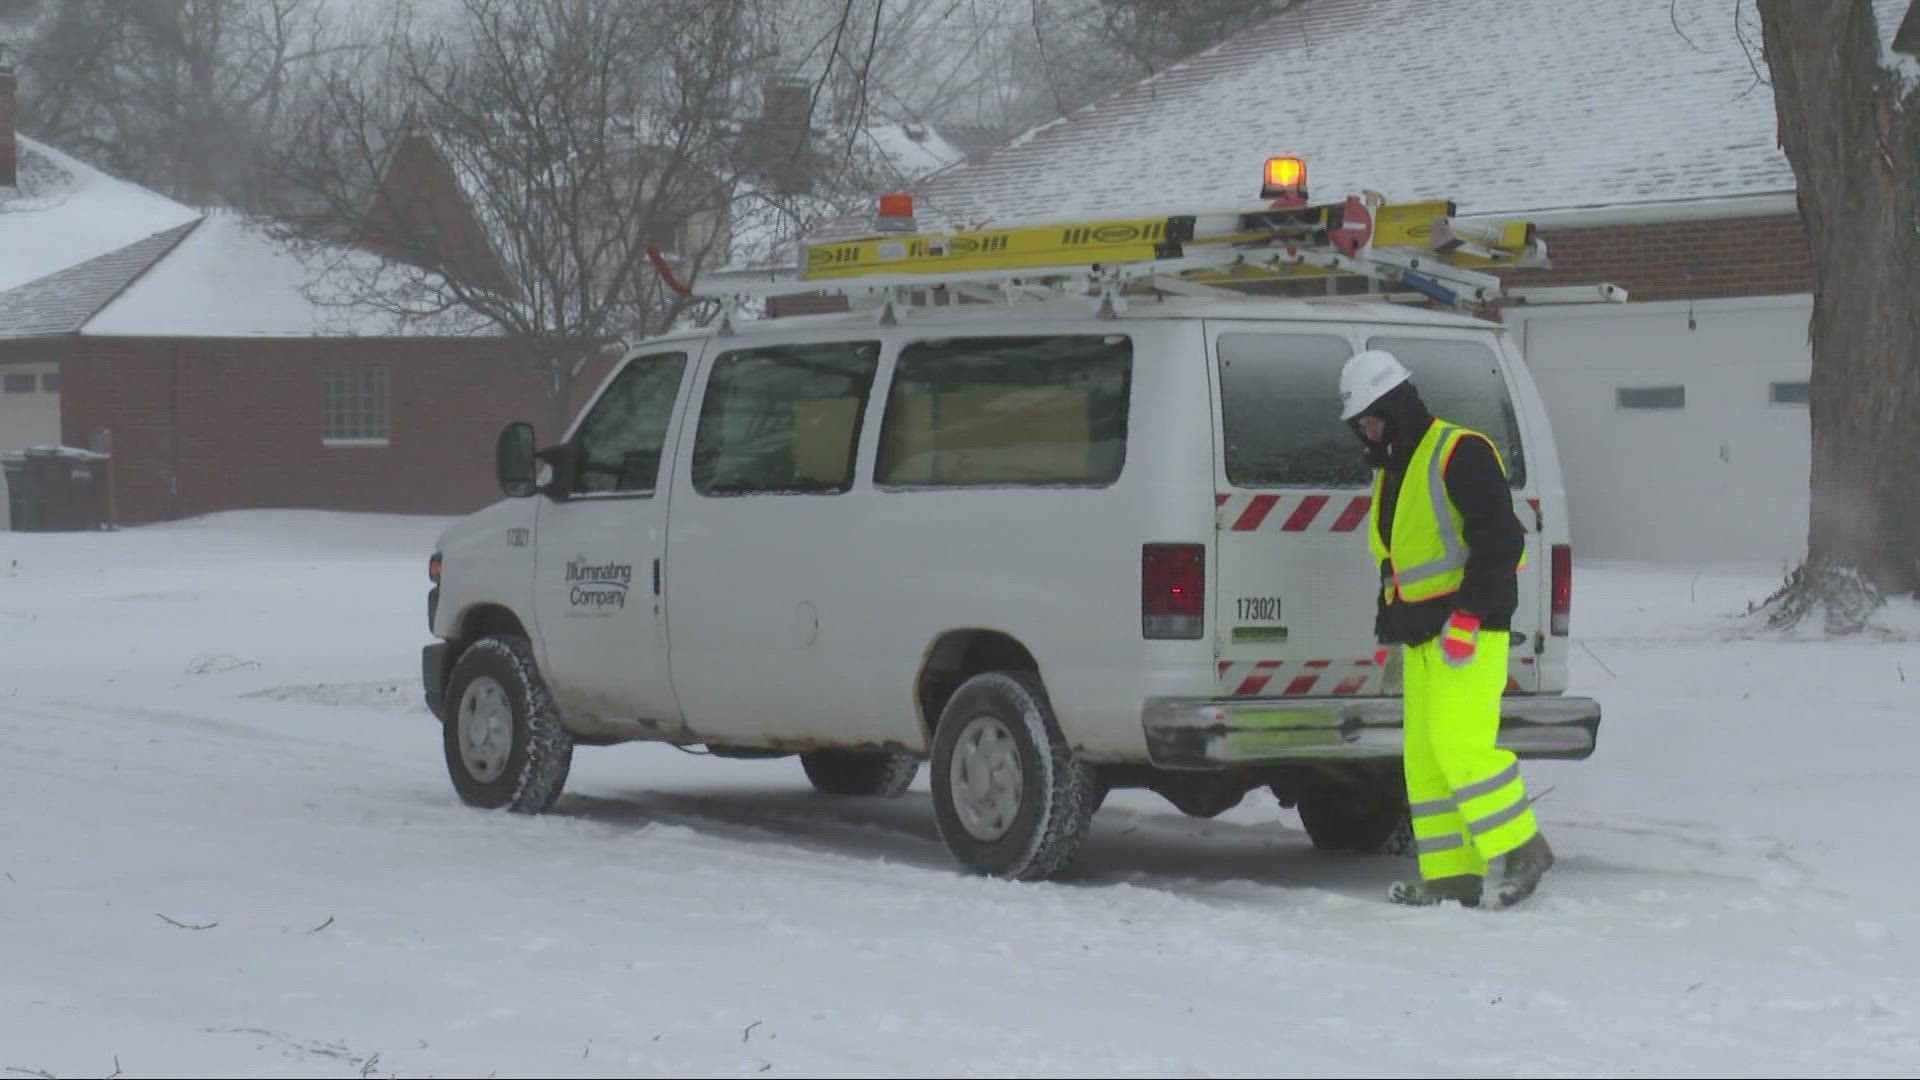 We're tracking power outages throughout the region due to strong winds in the winter storm.